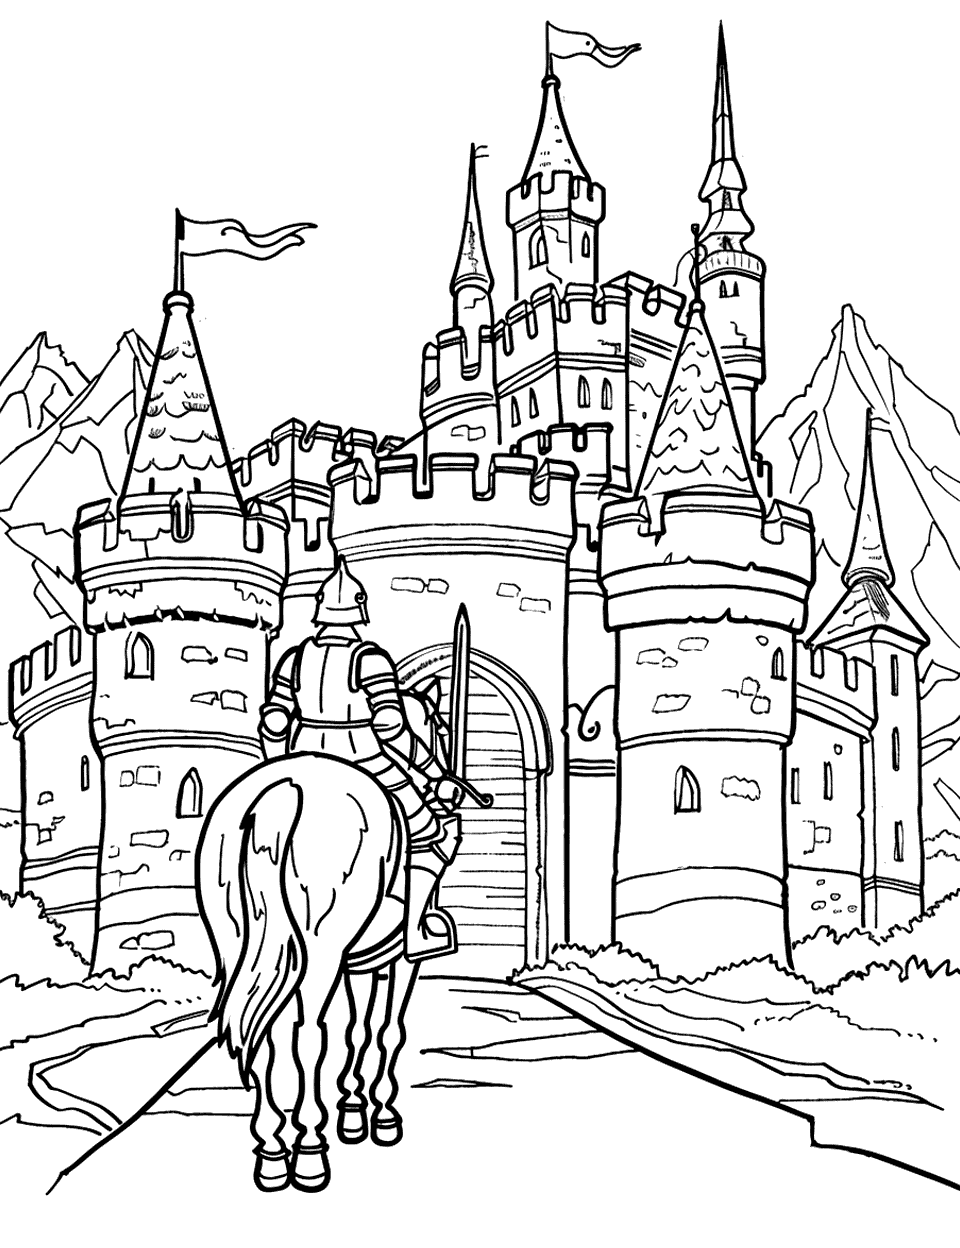 Knight on Horseback Castle Coloring Page - A brave knight in shining armor riding towards a medieval castle.